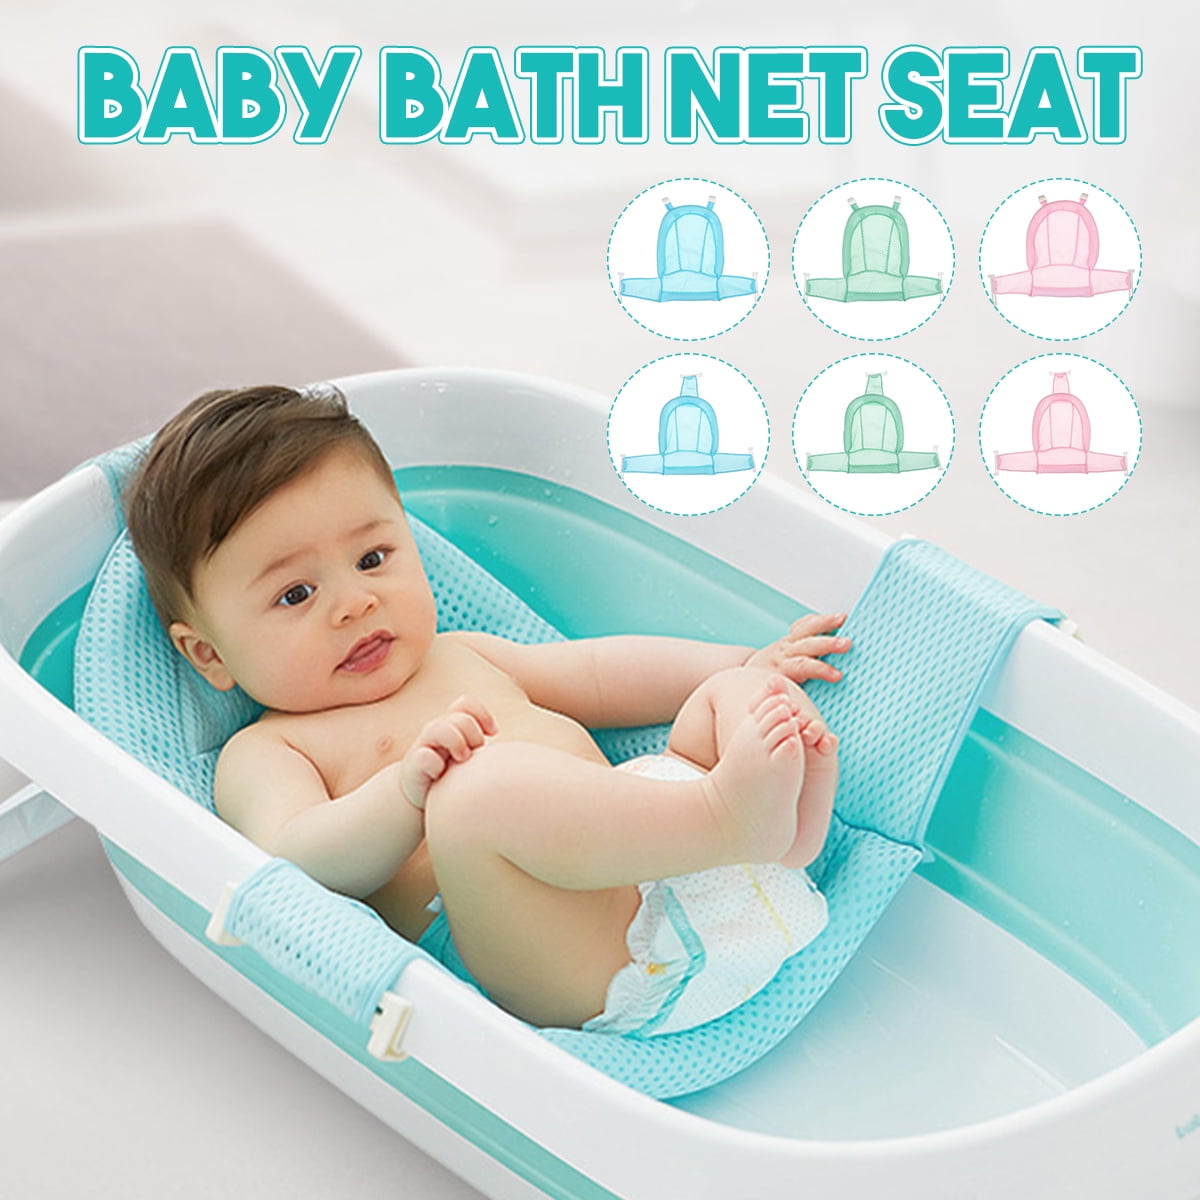 Details about   Adjustable Baby Bath Seat Safety Bathtub Bathing Shower Support Fold Net  @ 